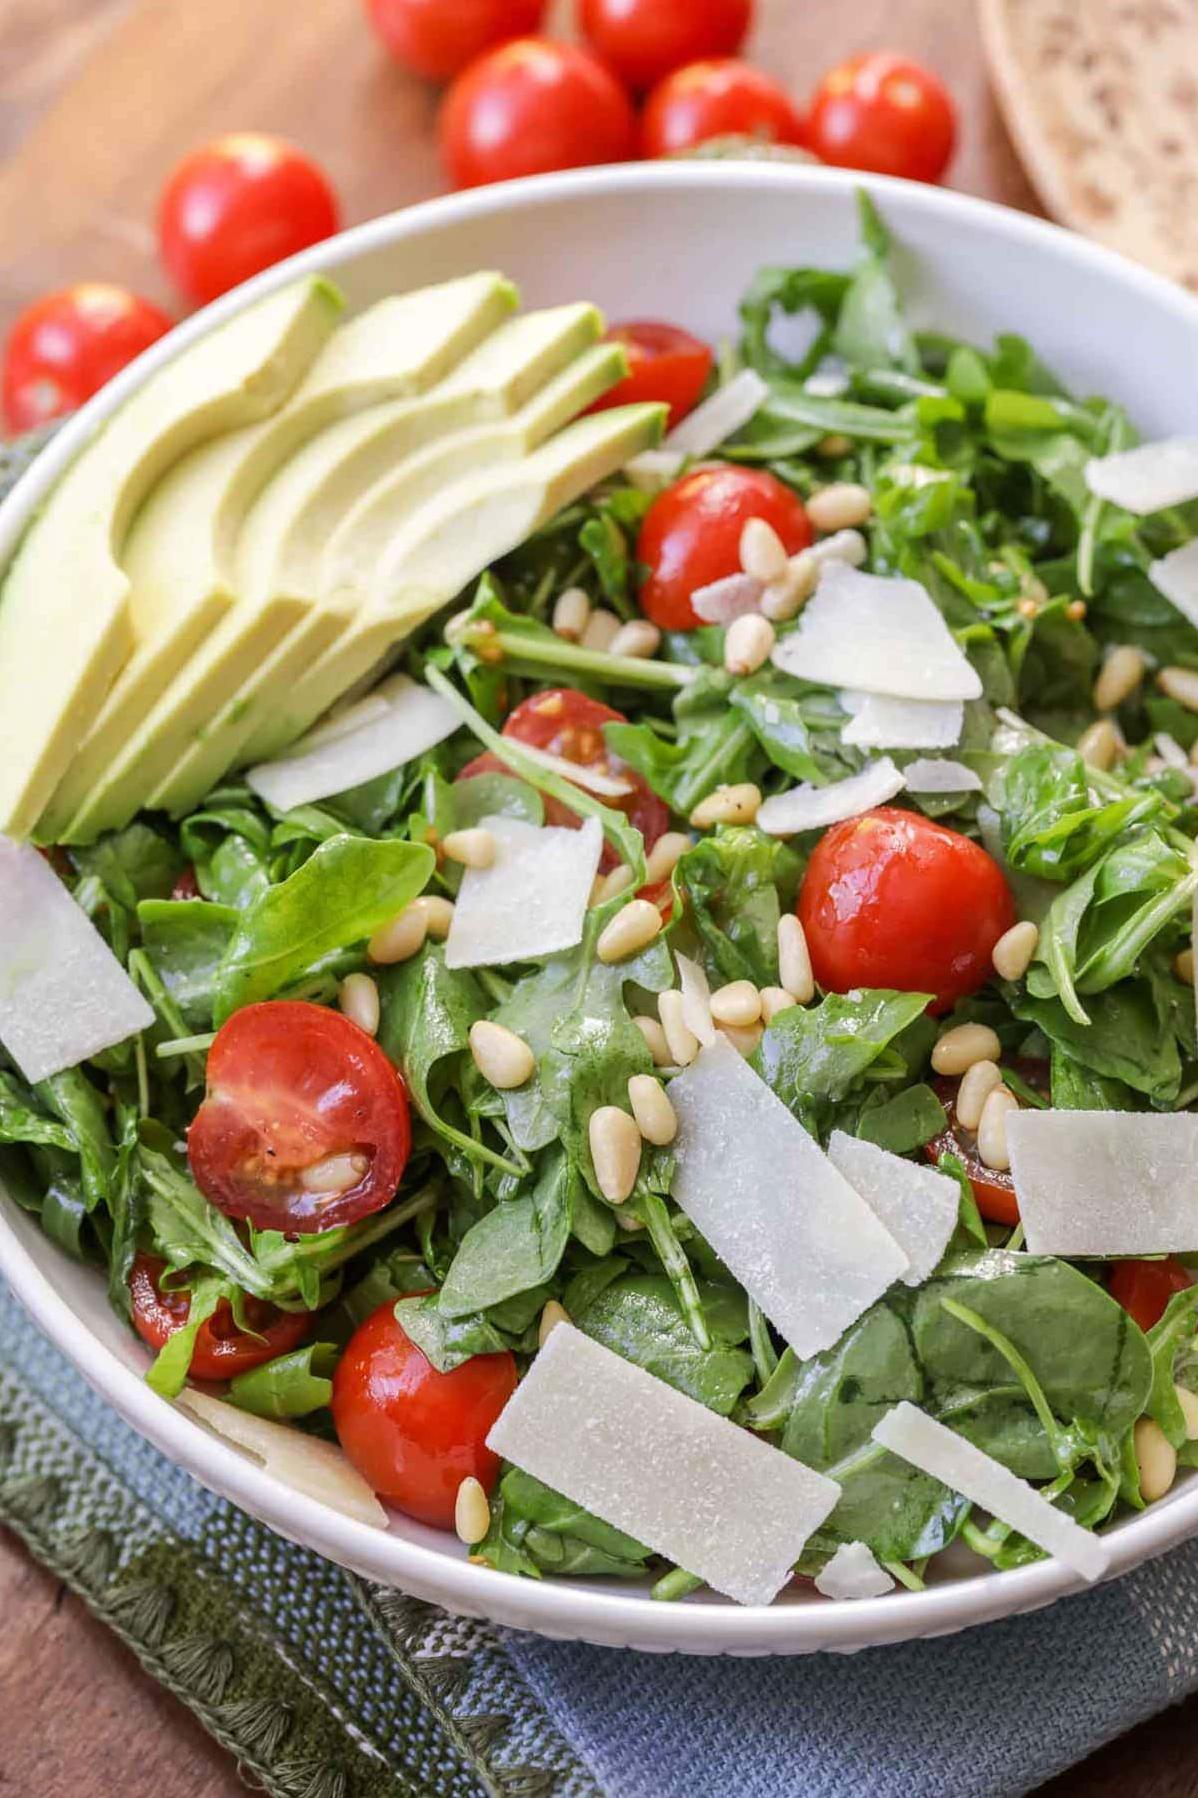  This arugula salad with wine and cheese dressing is perfect for a hot summer day.